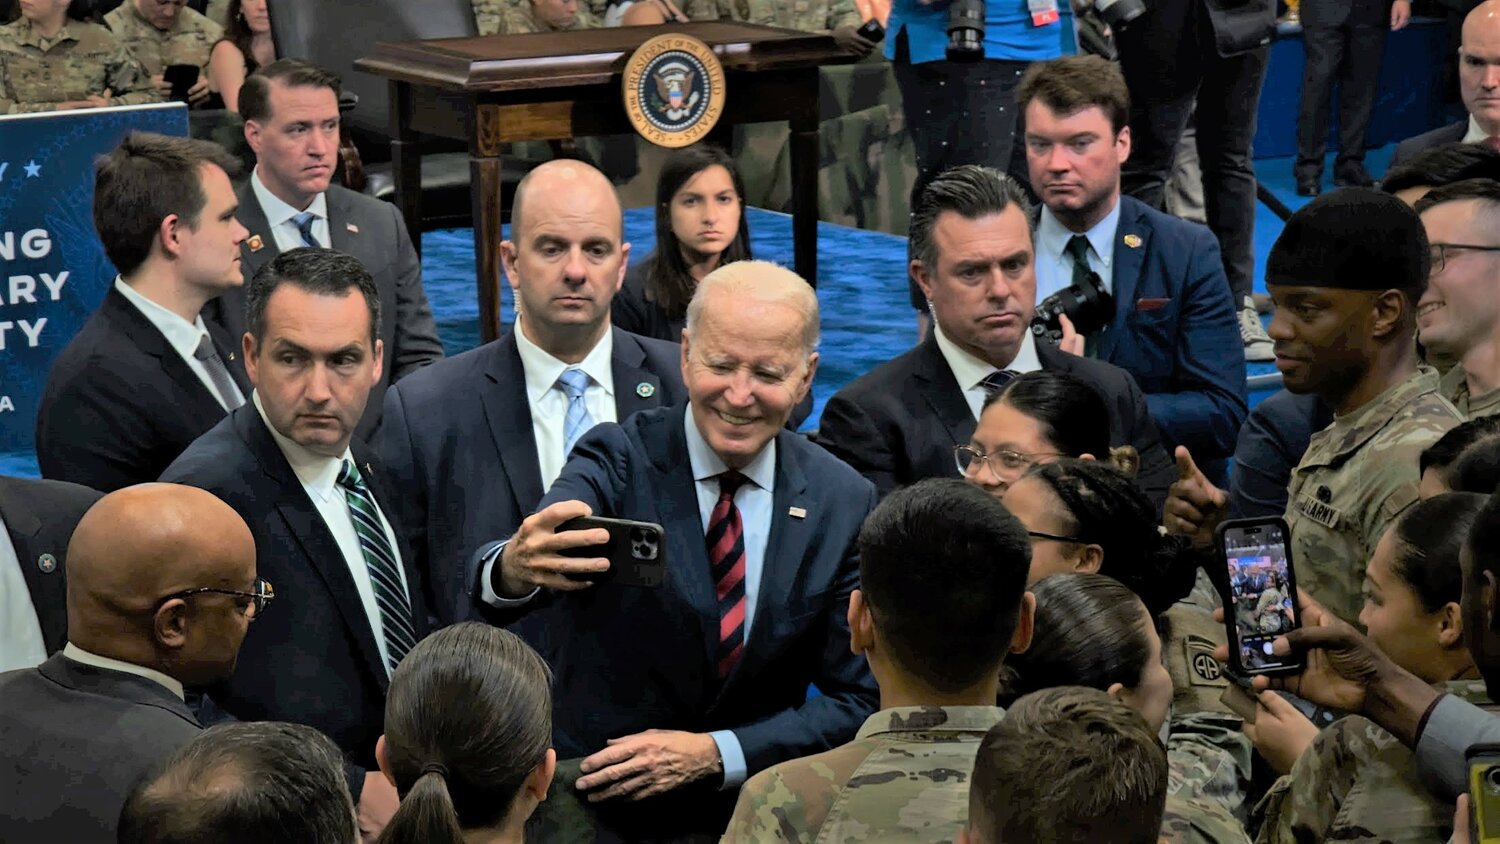 President Joe Biden, following his speech concerning the executive order on military family support, takes selfies with military personnel on Friday at Fort Liberty.